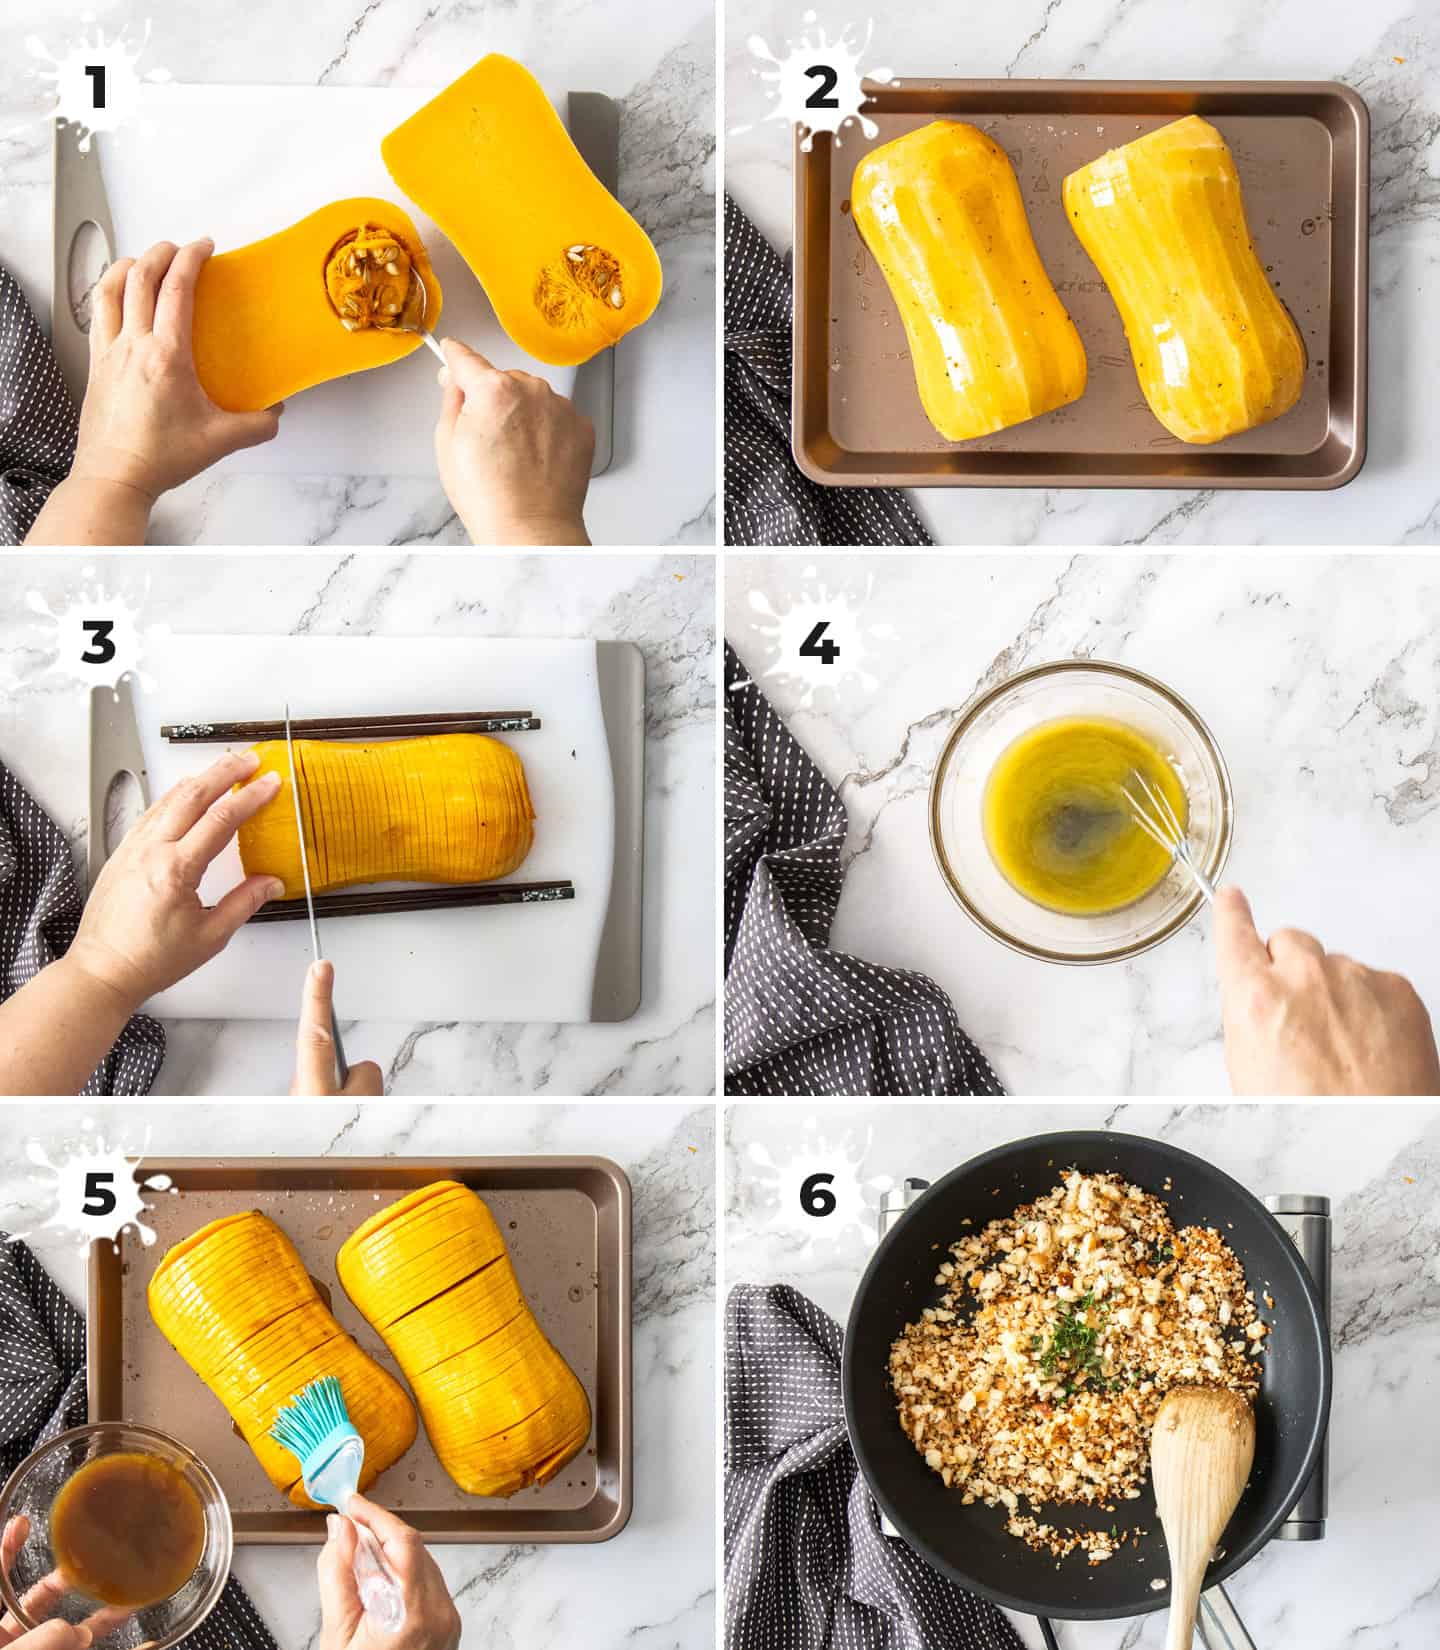 A collage of 6 images showing how to make hasselback butternut squash.